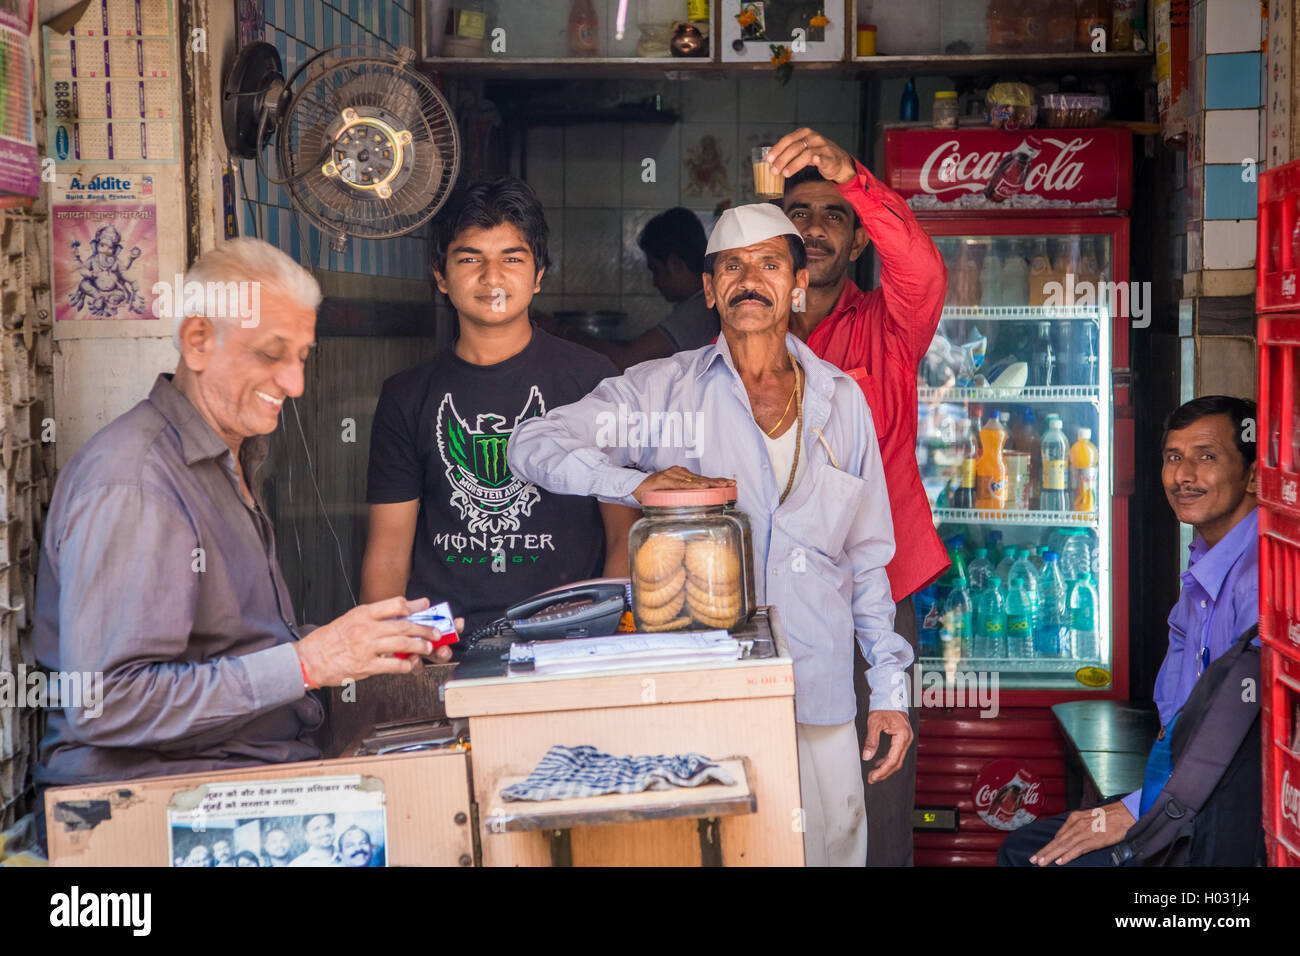 MUMBAI, INDIA - 17 JANUARY 2015: Street scene with men in front of small shop in town. Stock Photo